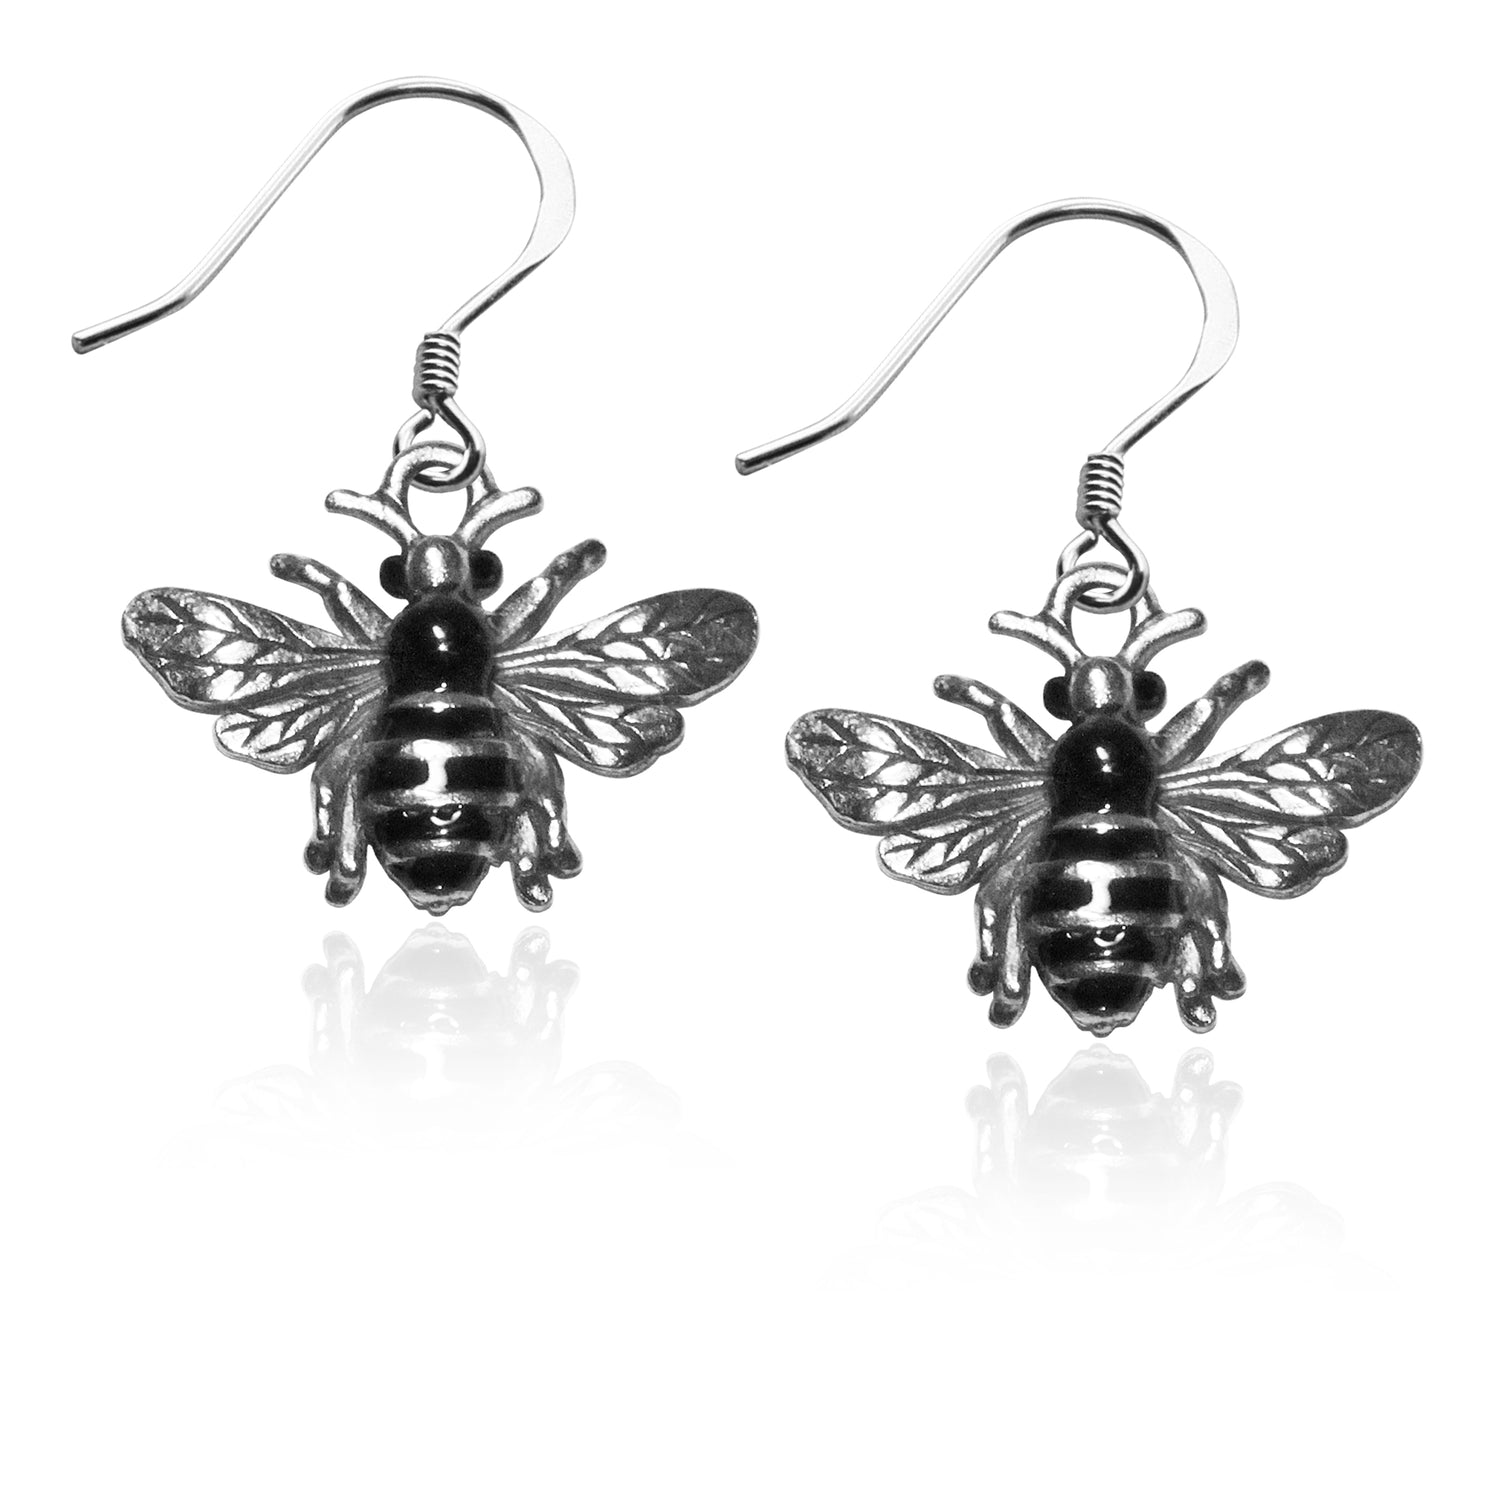 Whimsical Gifts | Bumble Bee Charm Earrings in Silver Finish | Animal Lover | Outdoor & Garden | Jewelry